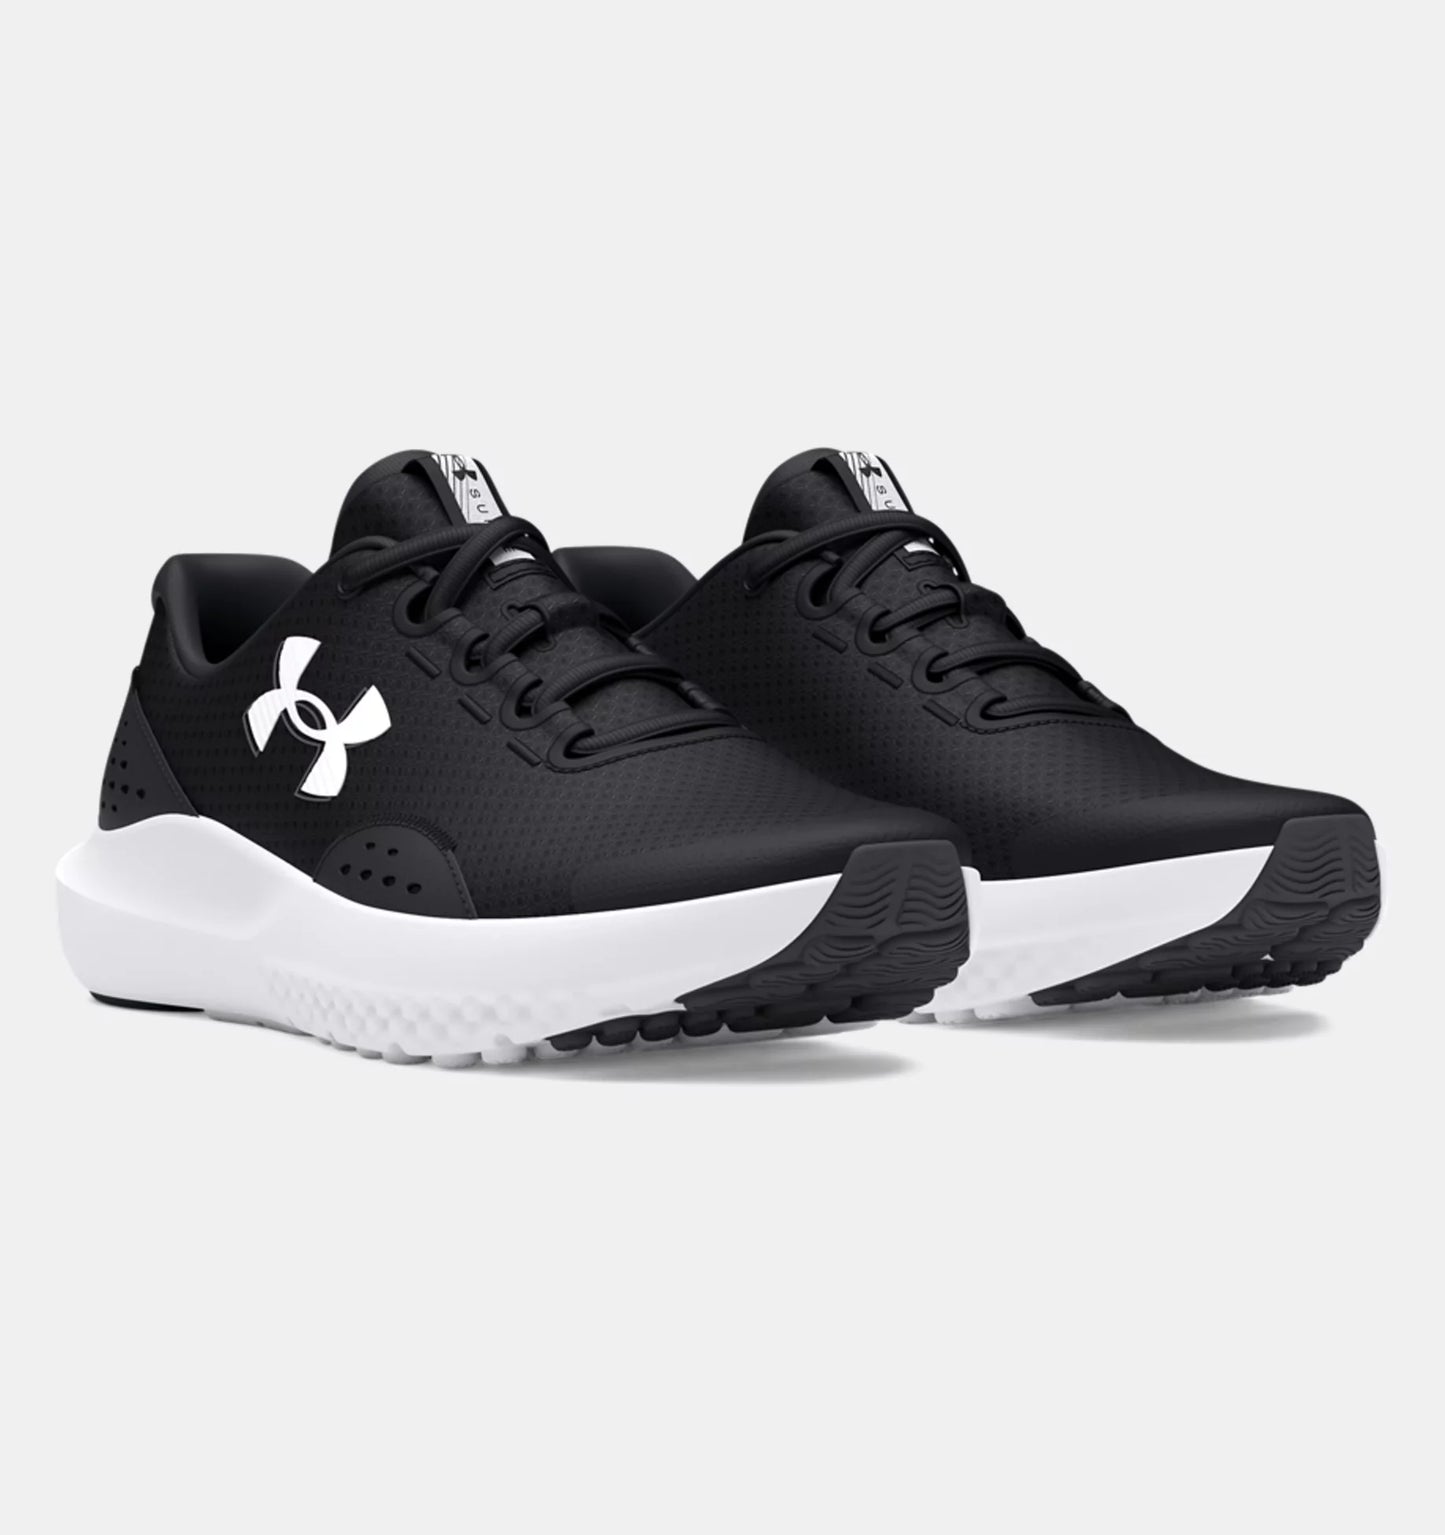 Under Armour Surge 4 Kids Running Shoes - Black